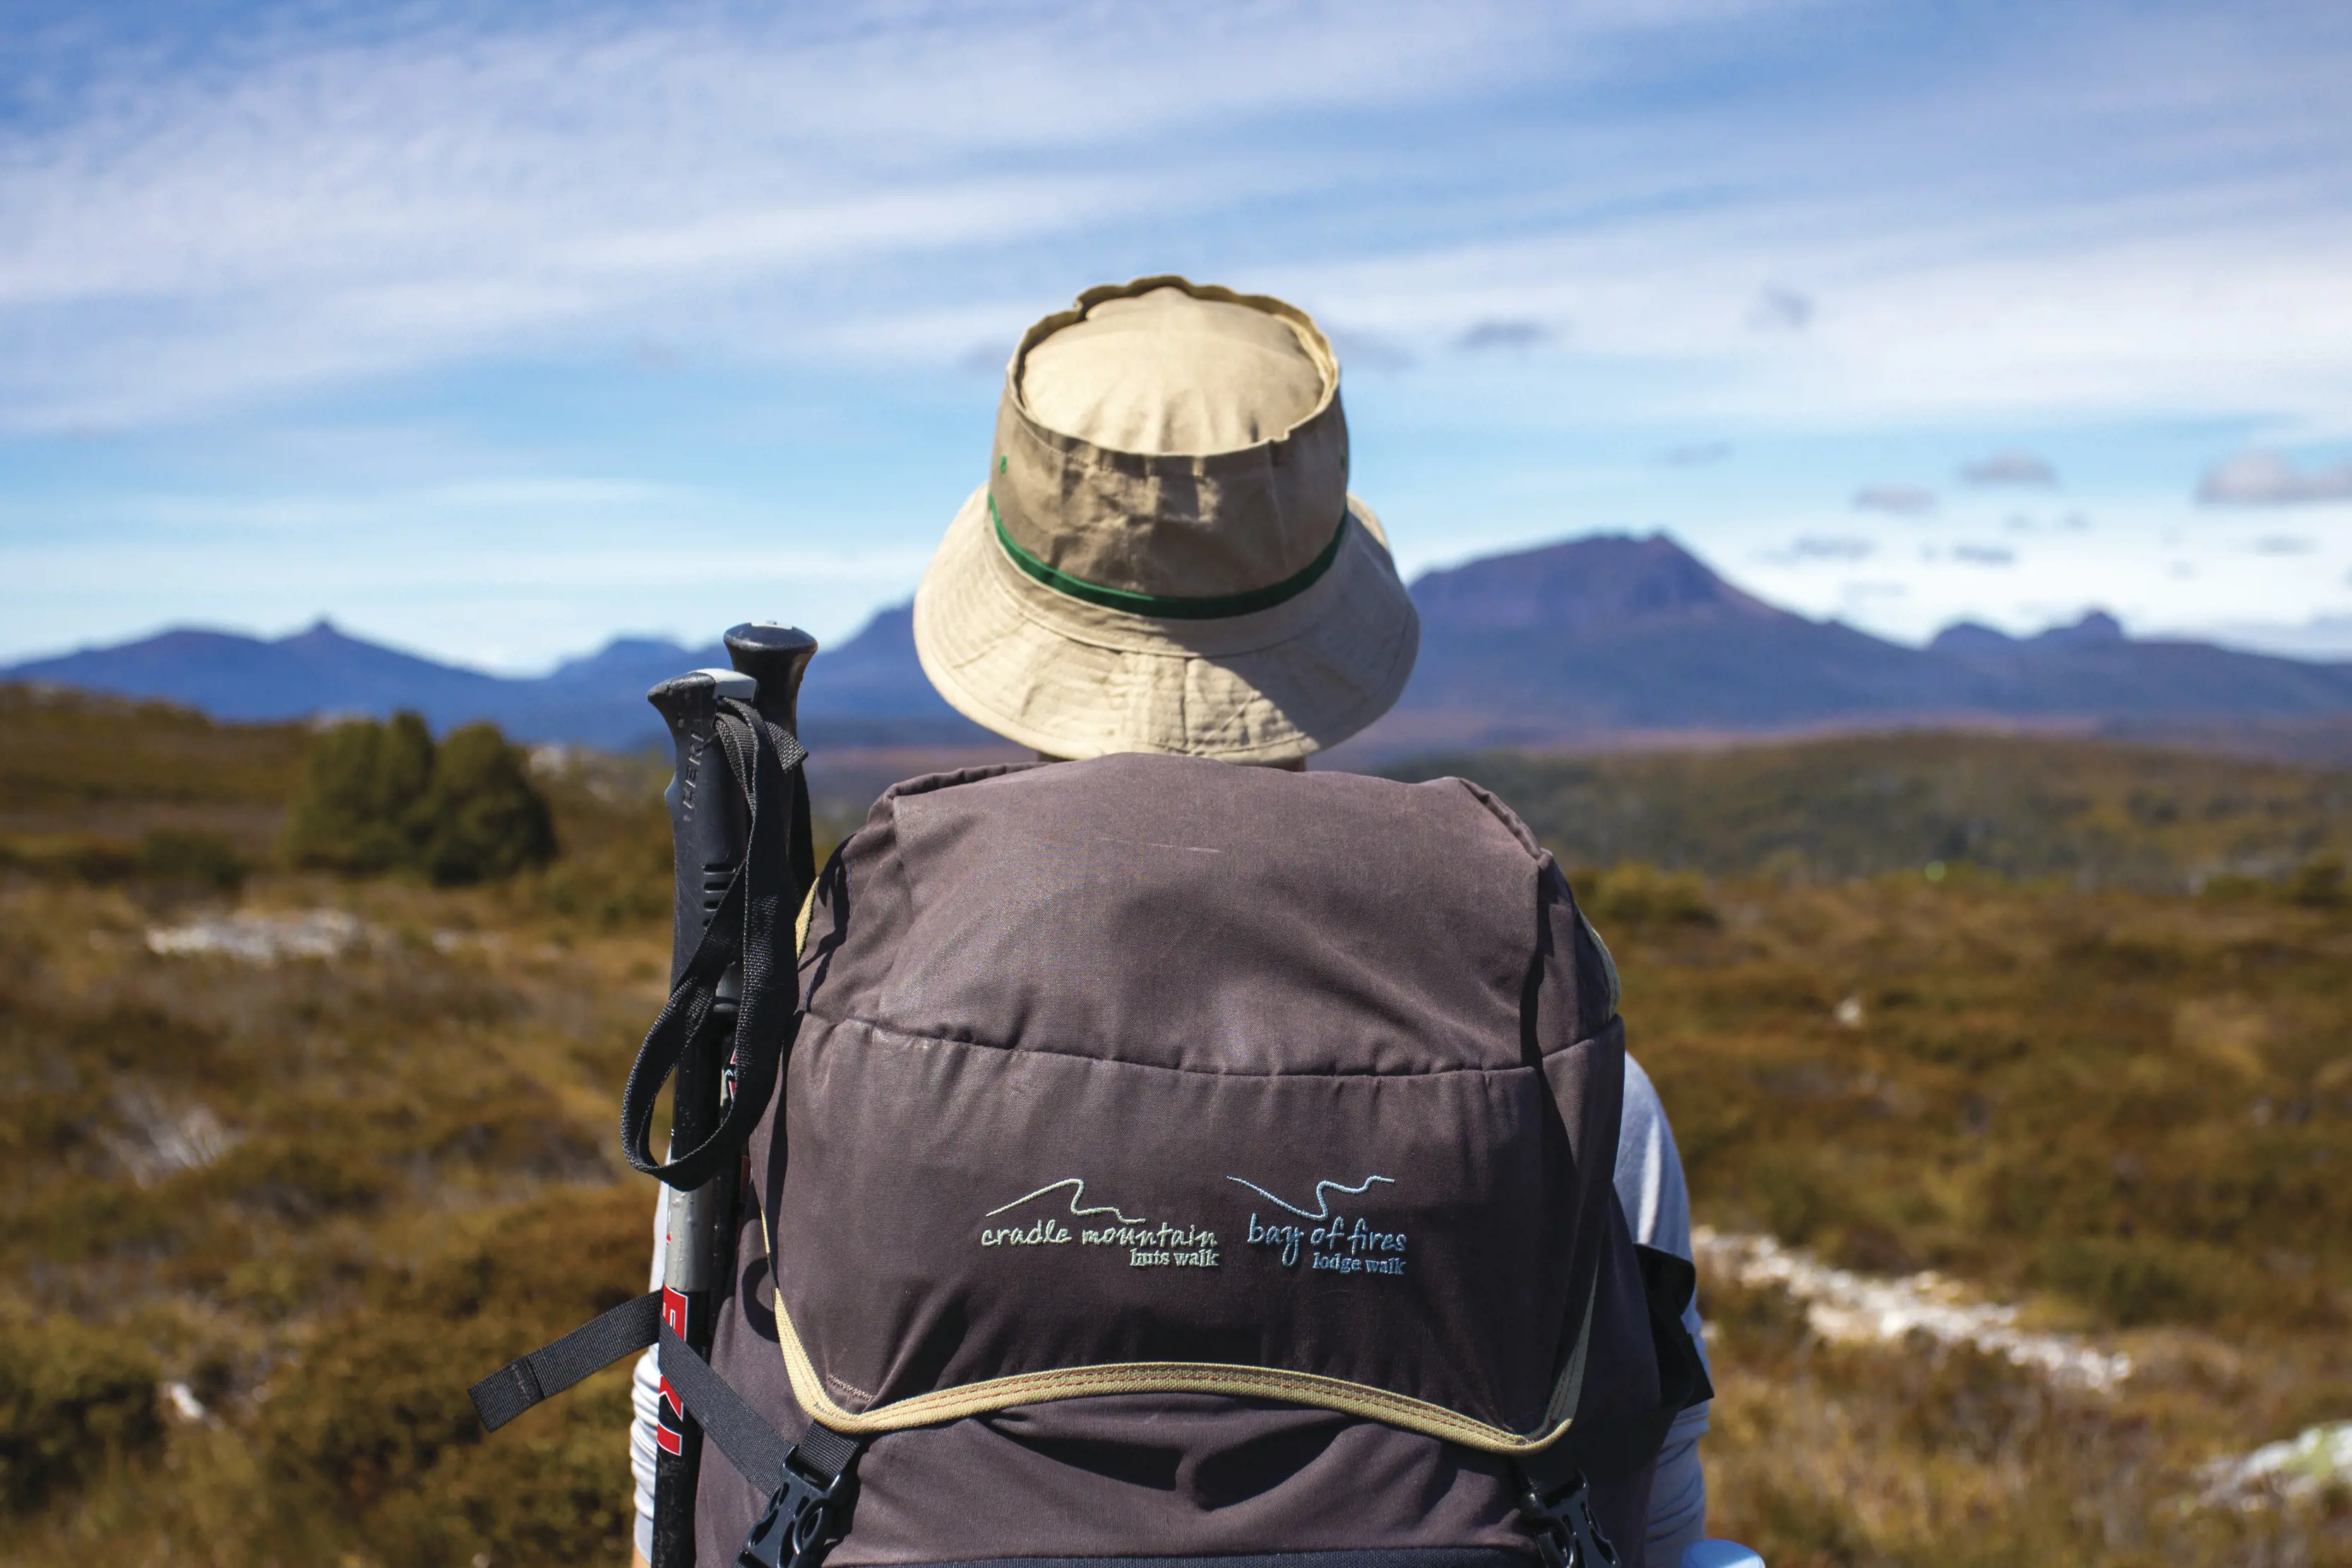 Shot from behind a hiker on the Cradle Mountain Huts Walk